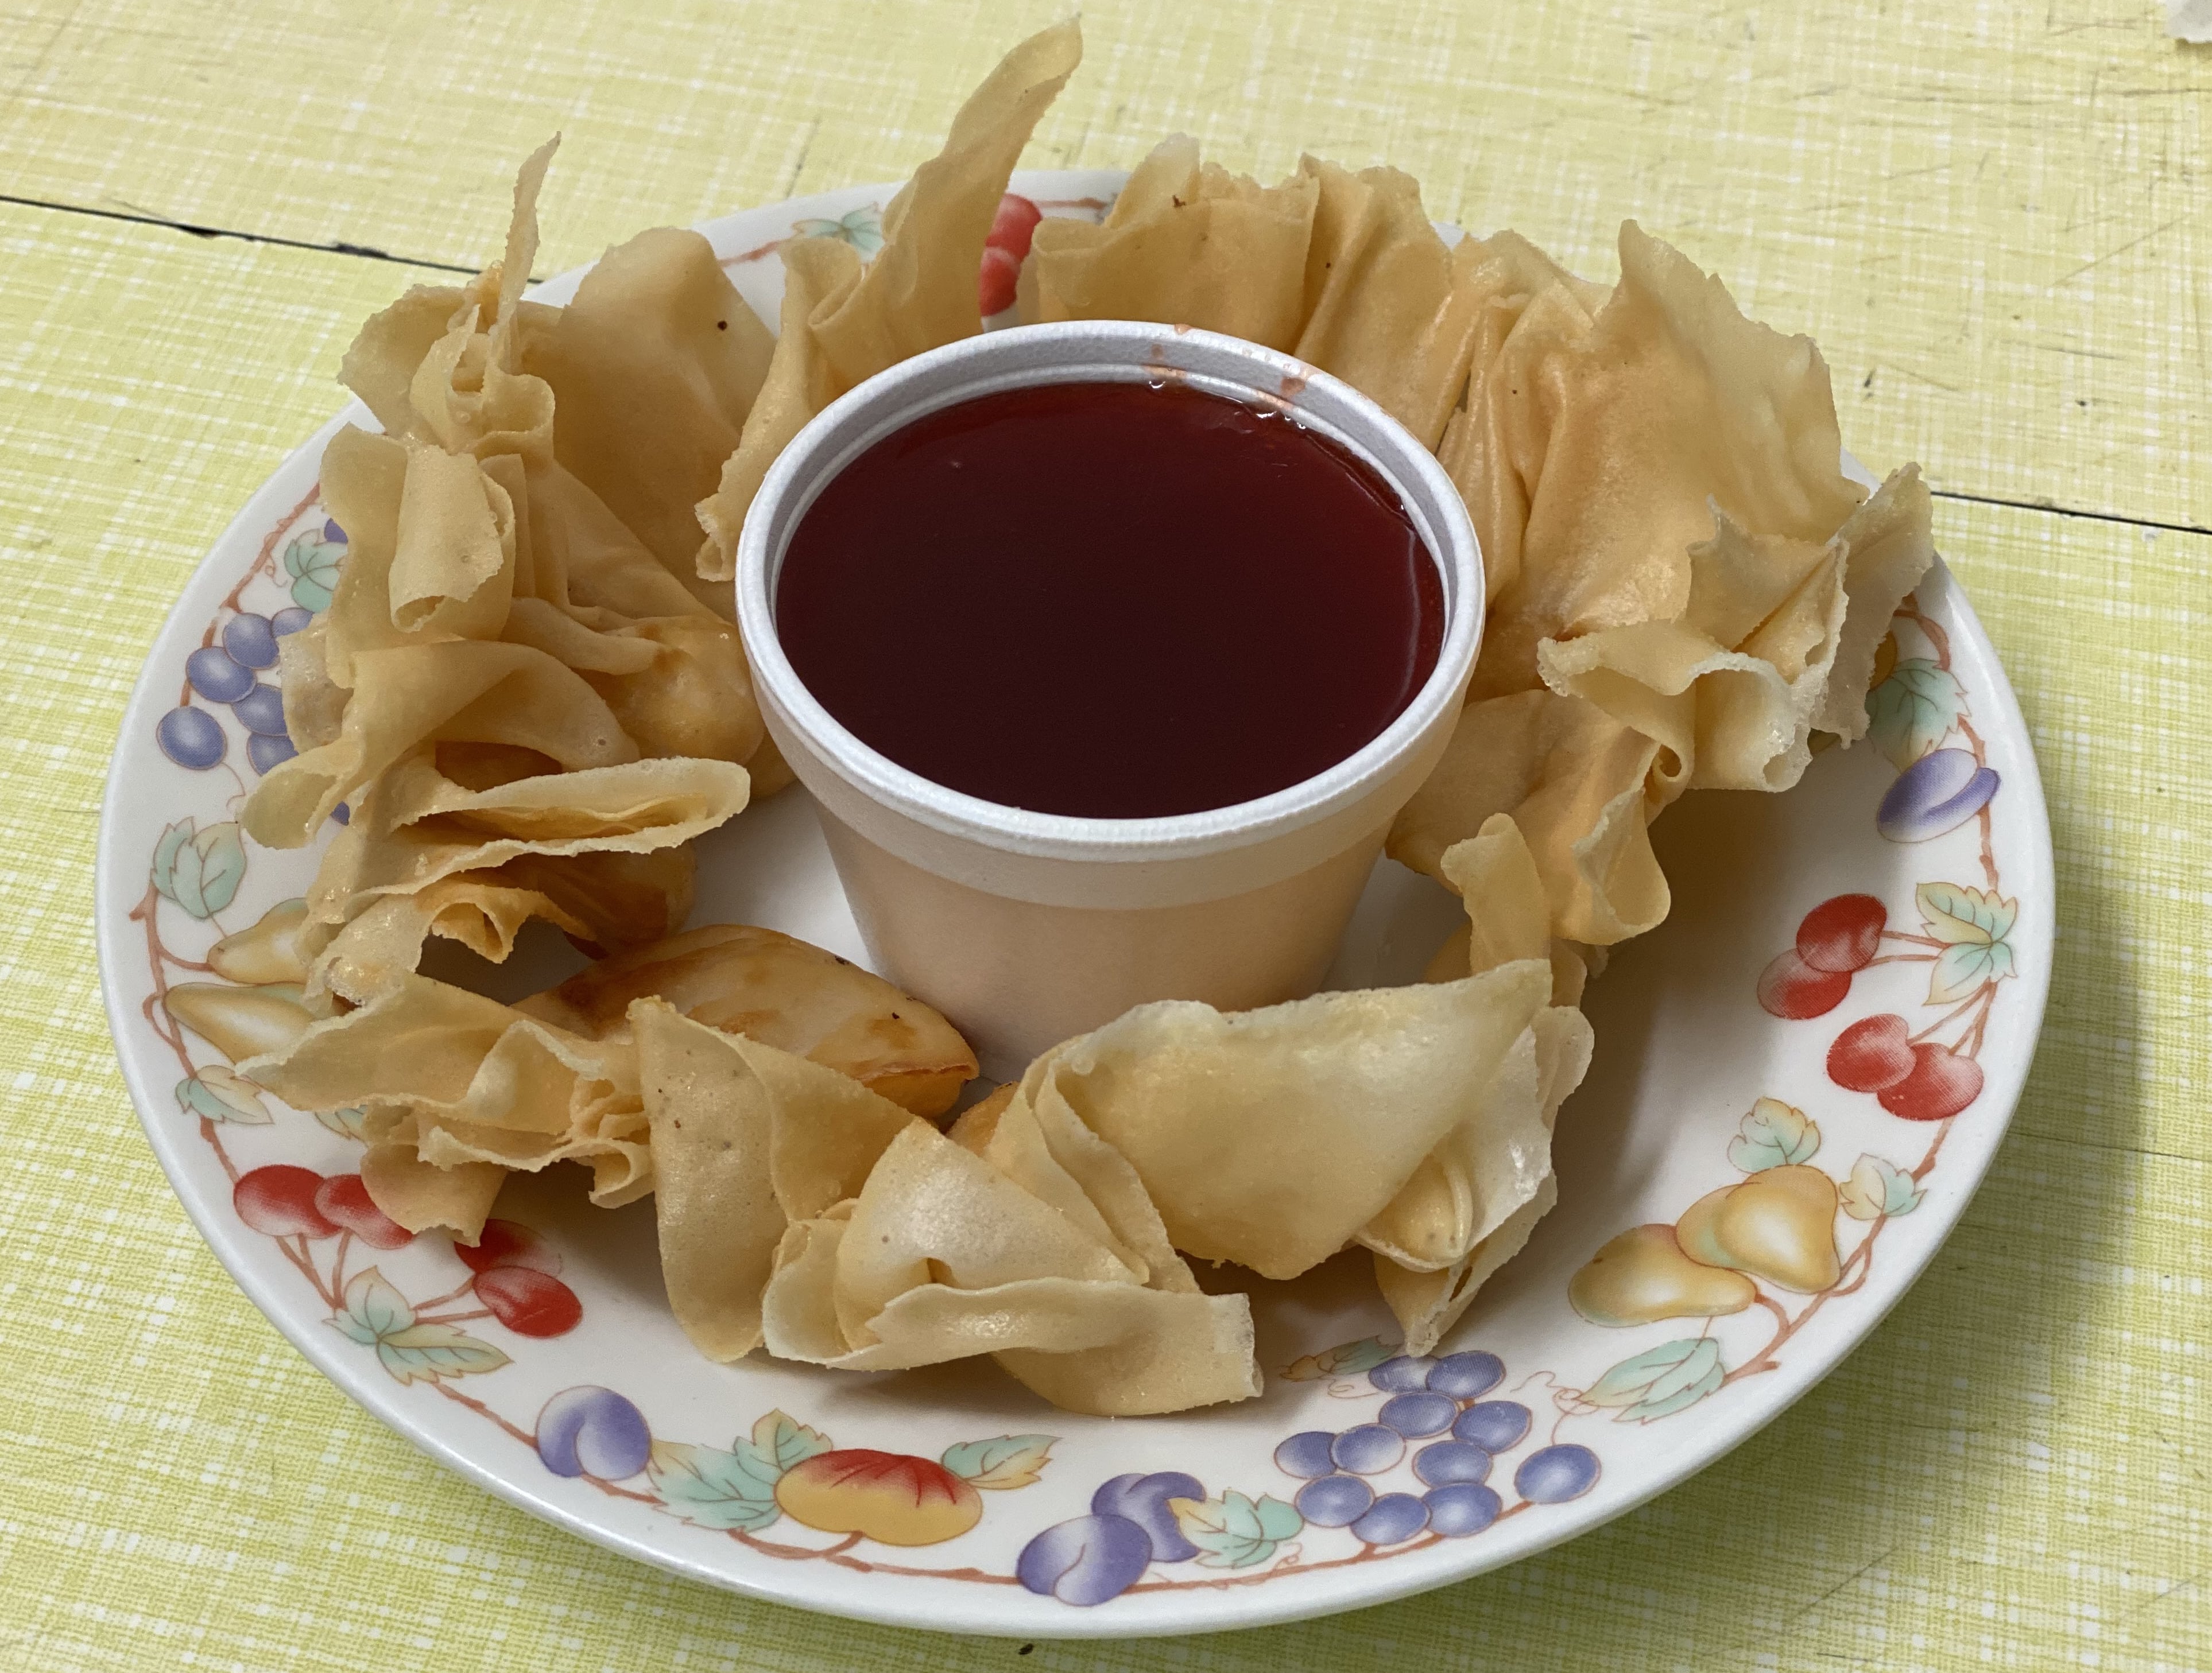 Crispy Won-tons with dipping sauce